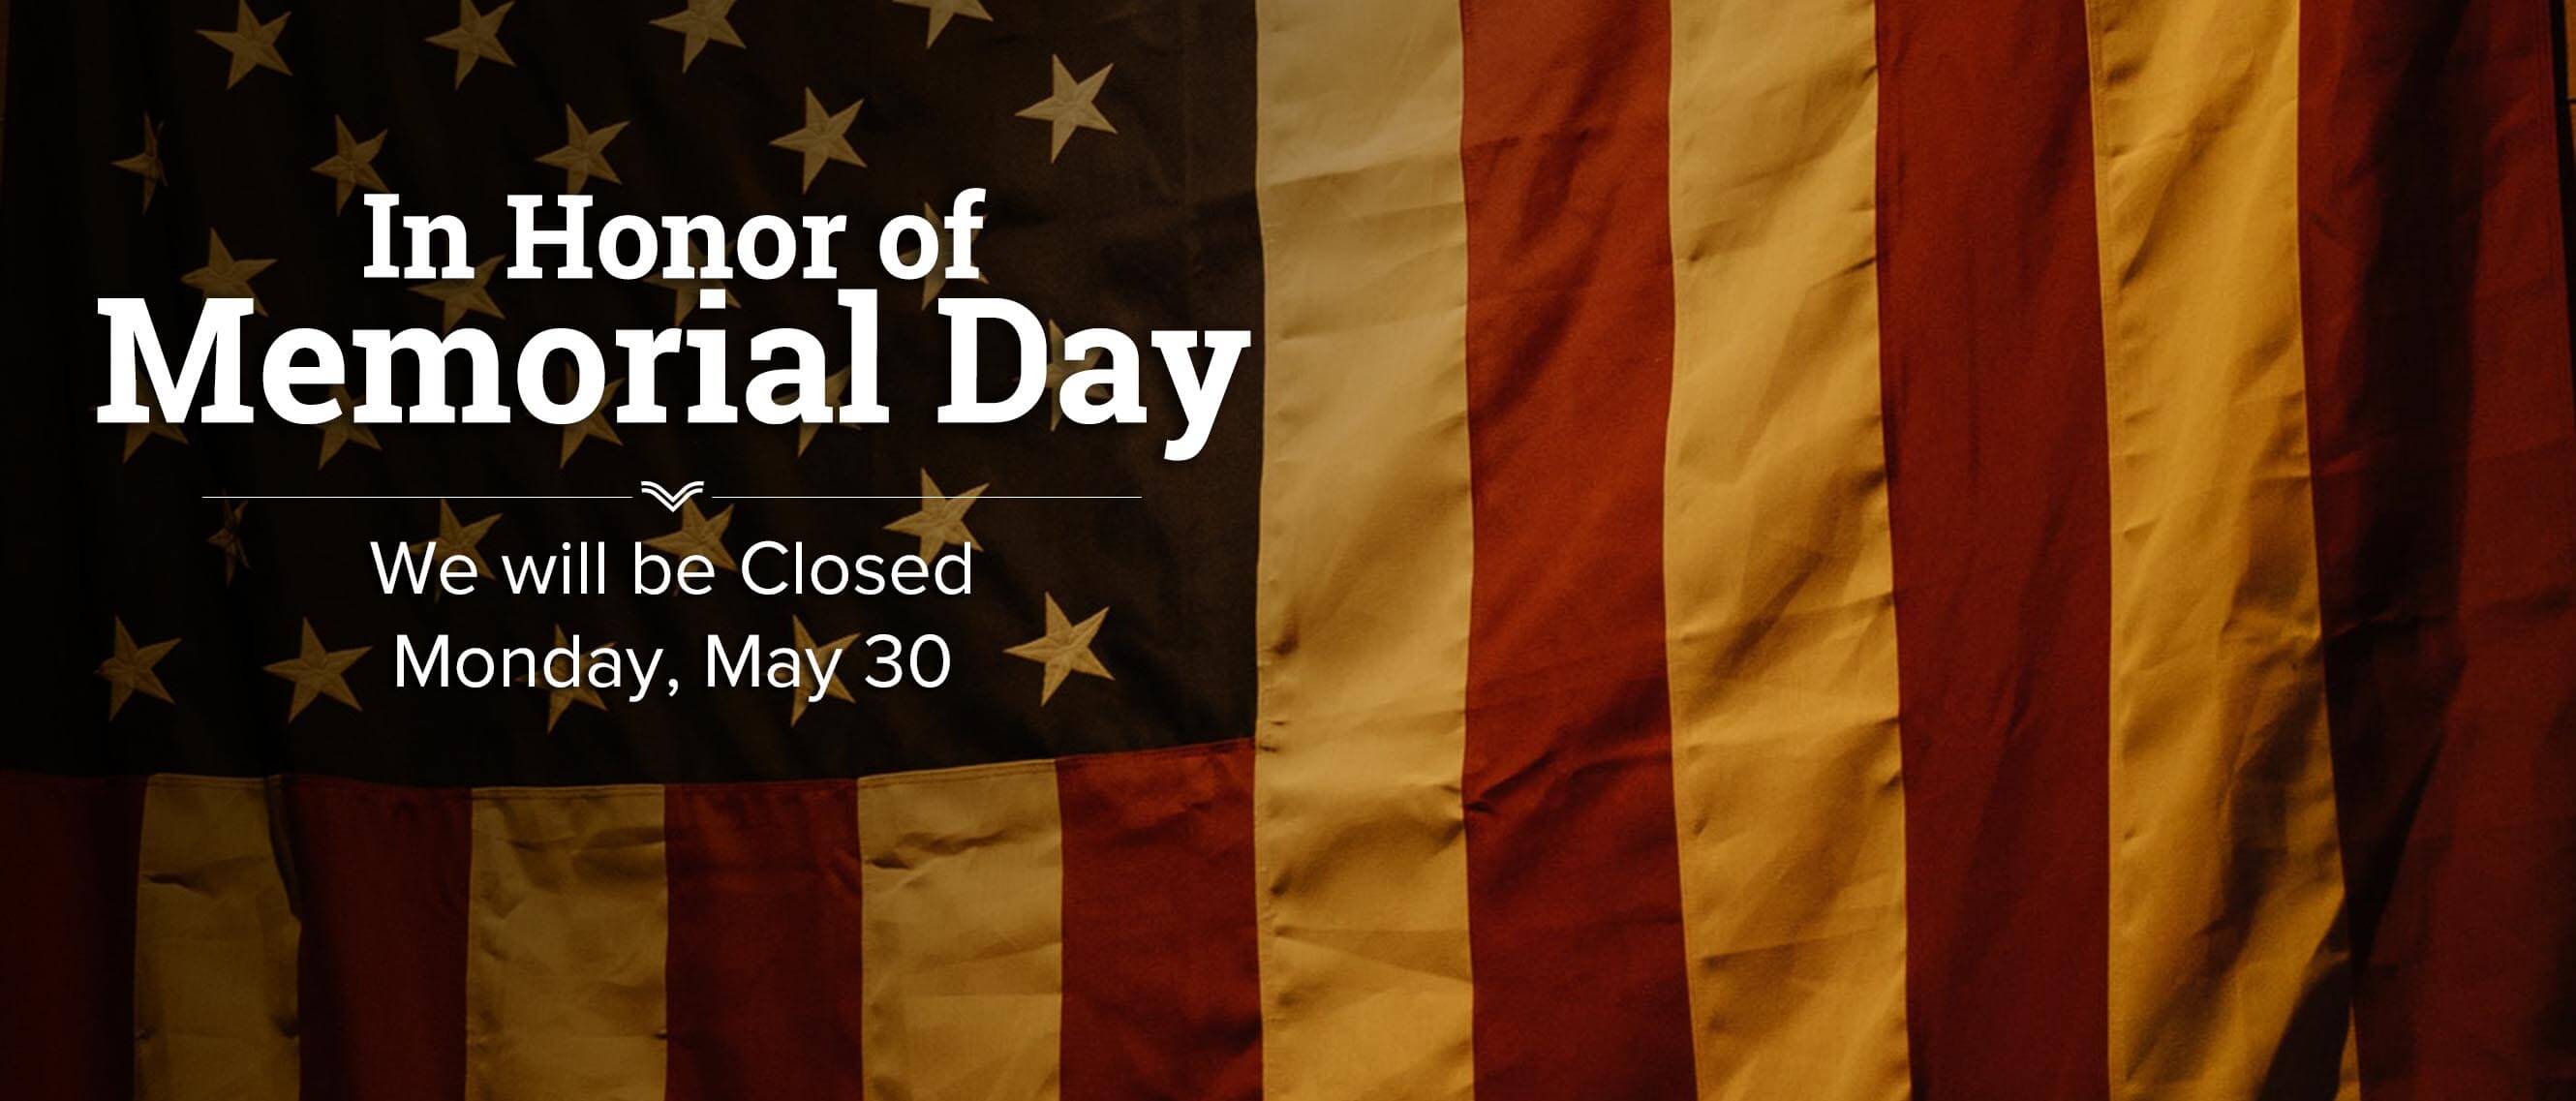 In Observance of Memorial Day We will be closed Monday, May. 30